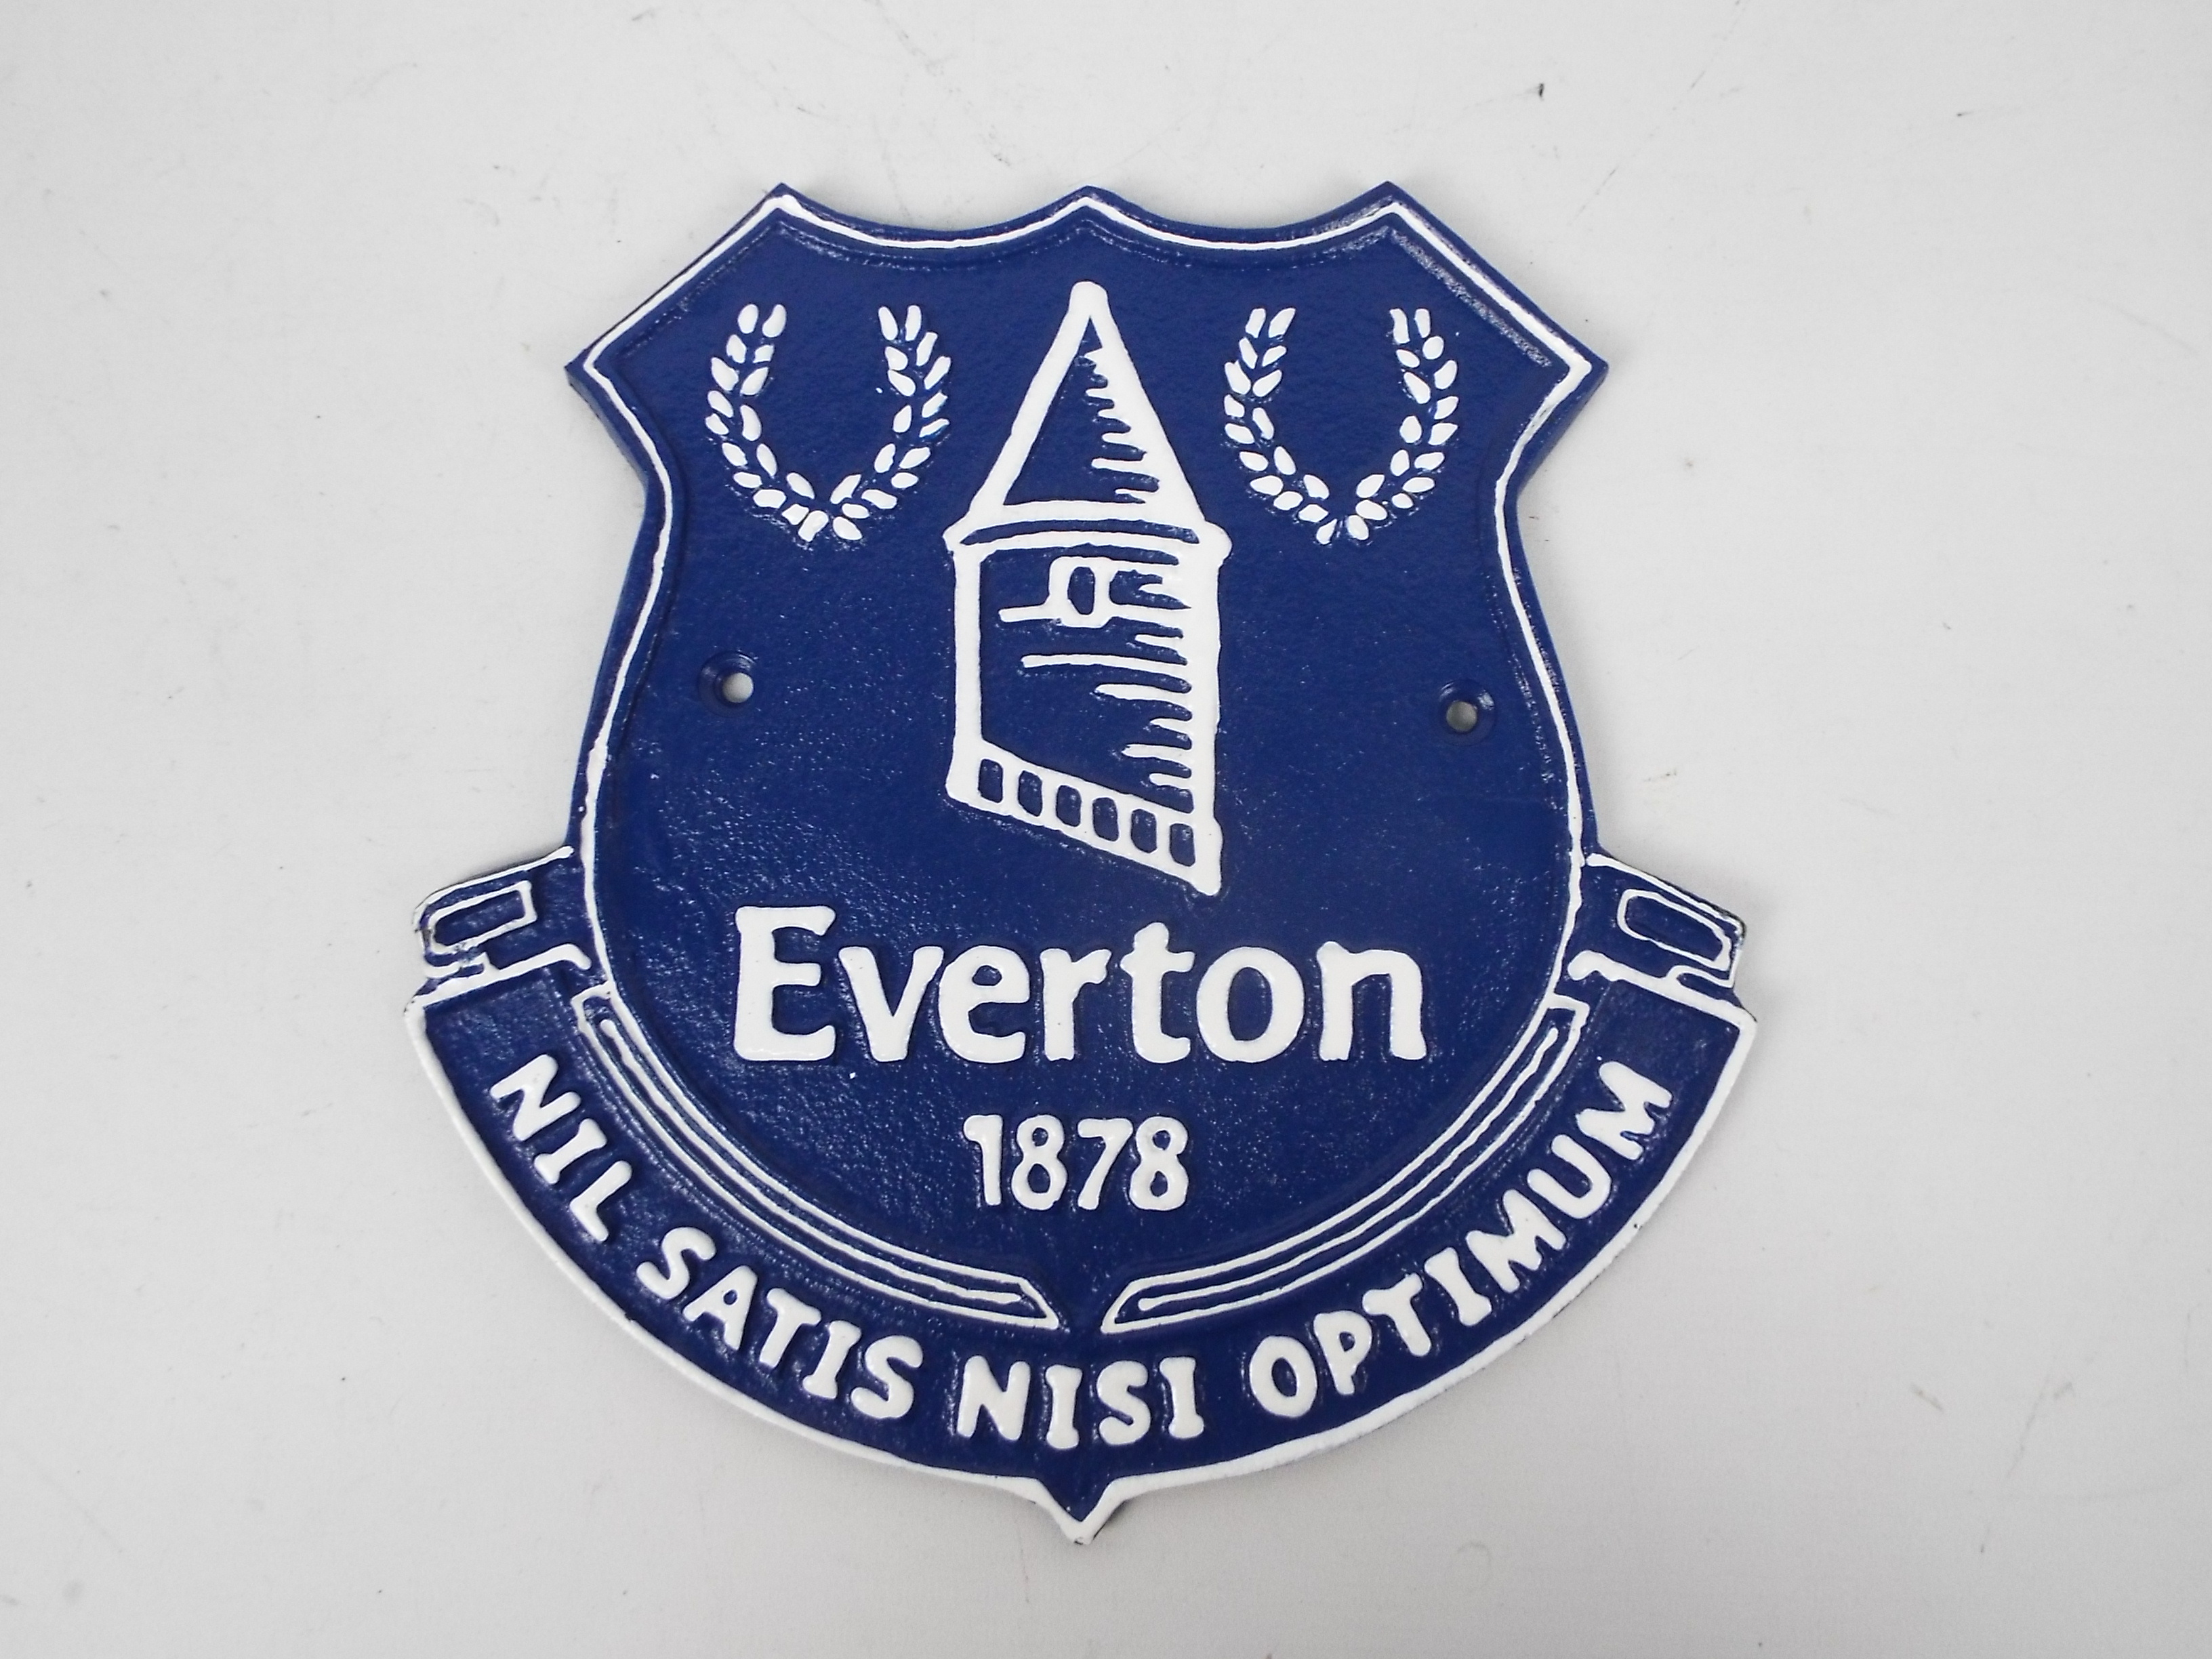 A cast iron wall plaque marked Everton,